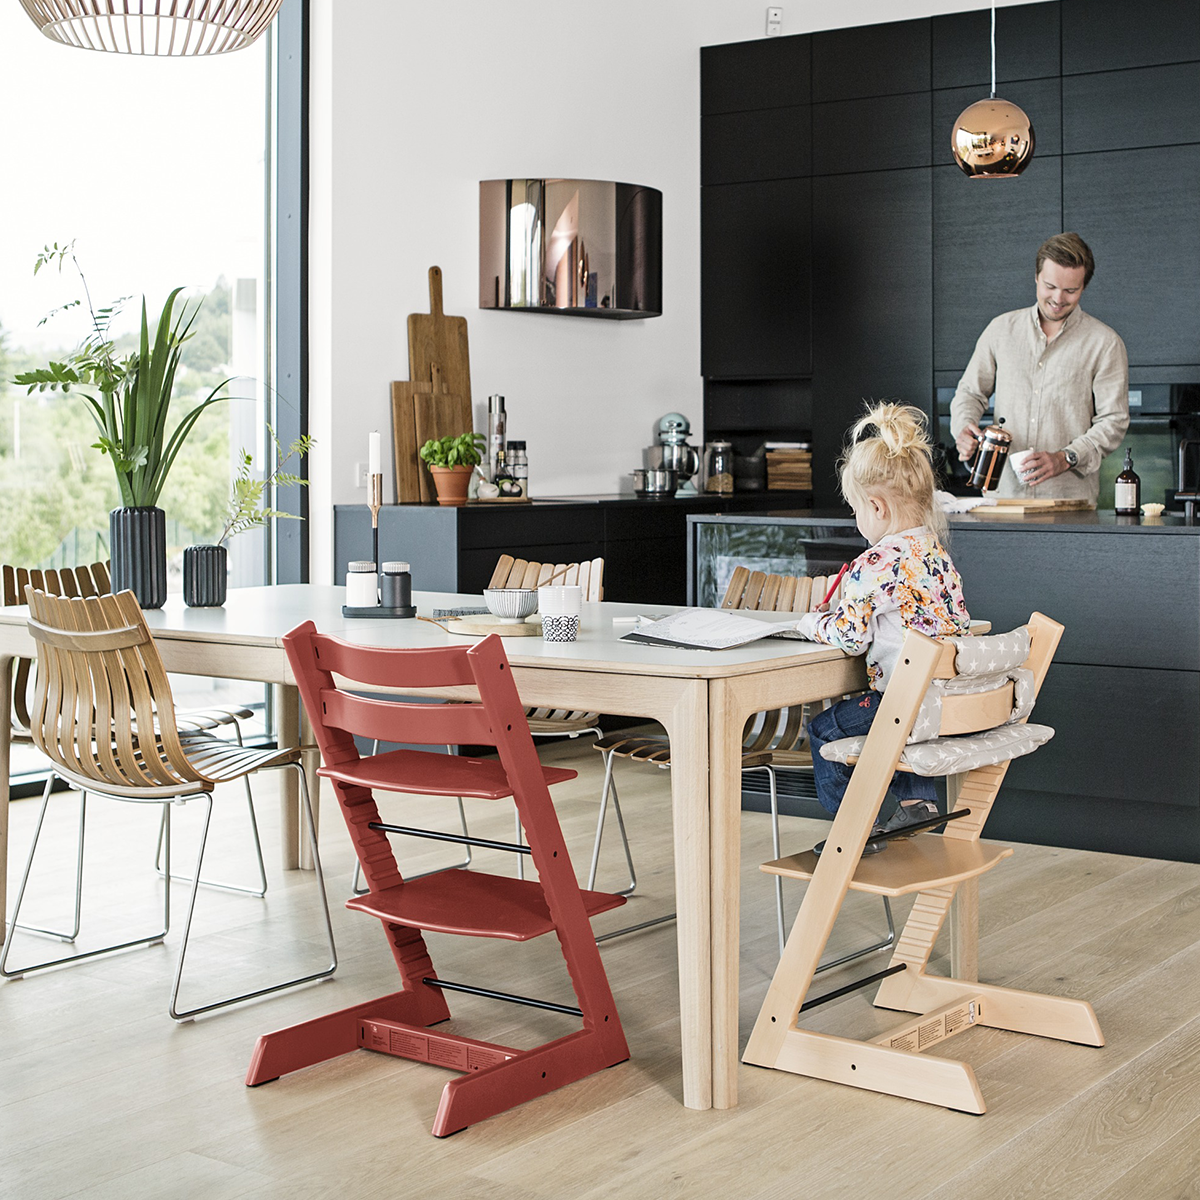 Stokke Tripp Trapp High Chair | Baby Little Planet